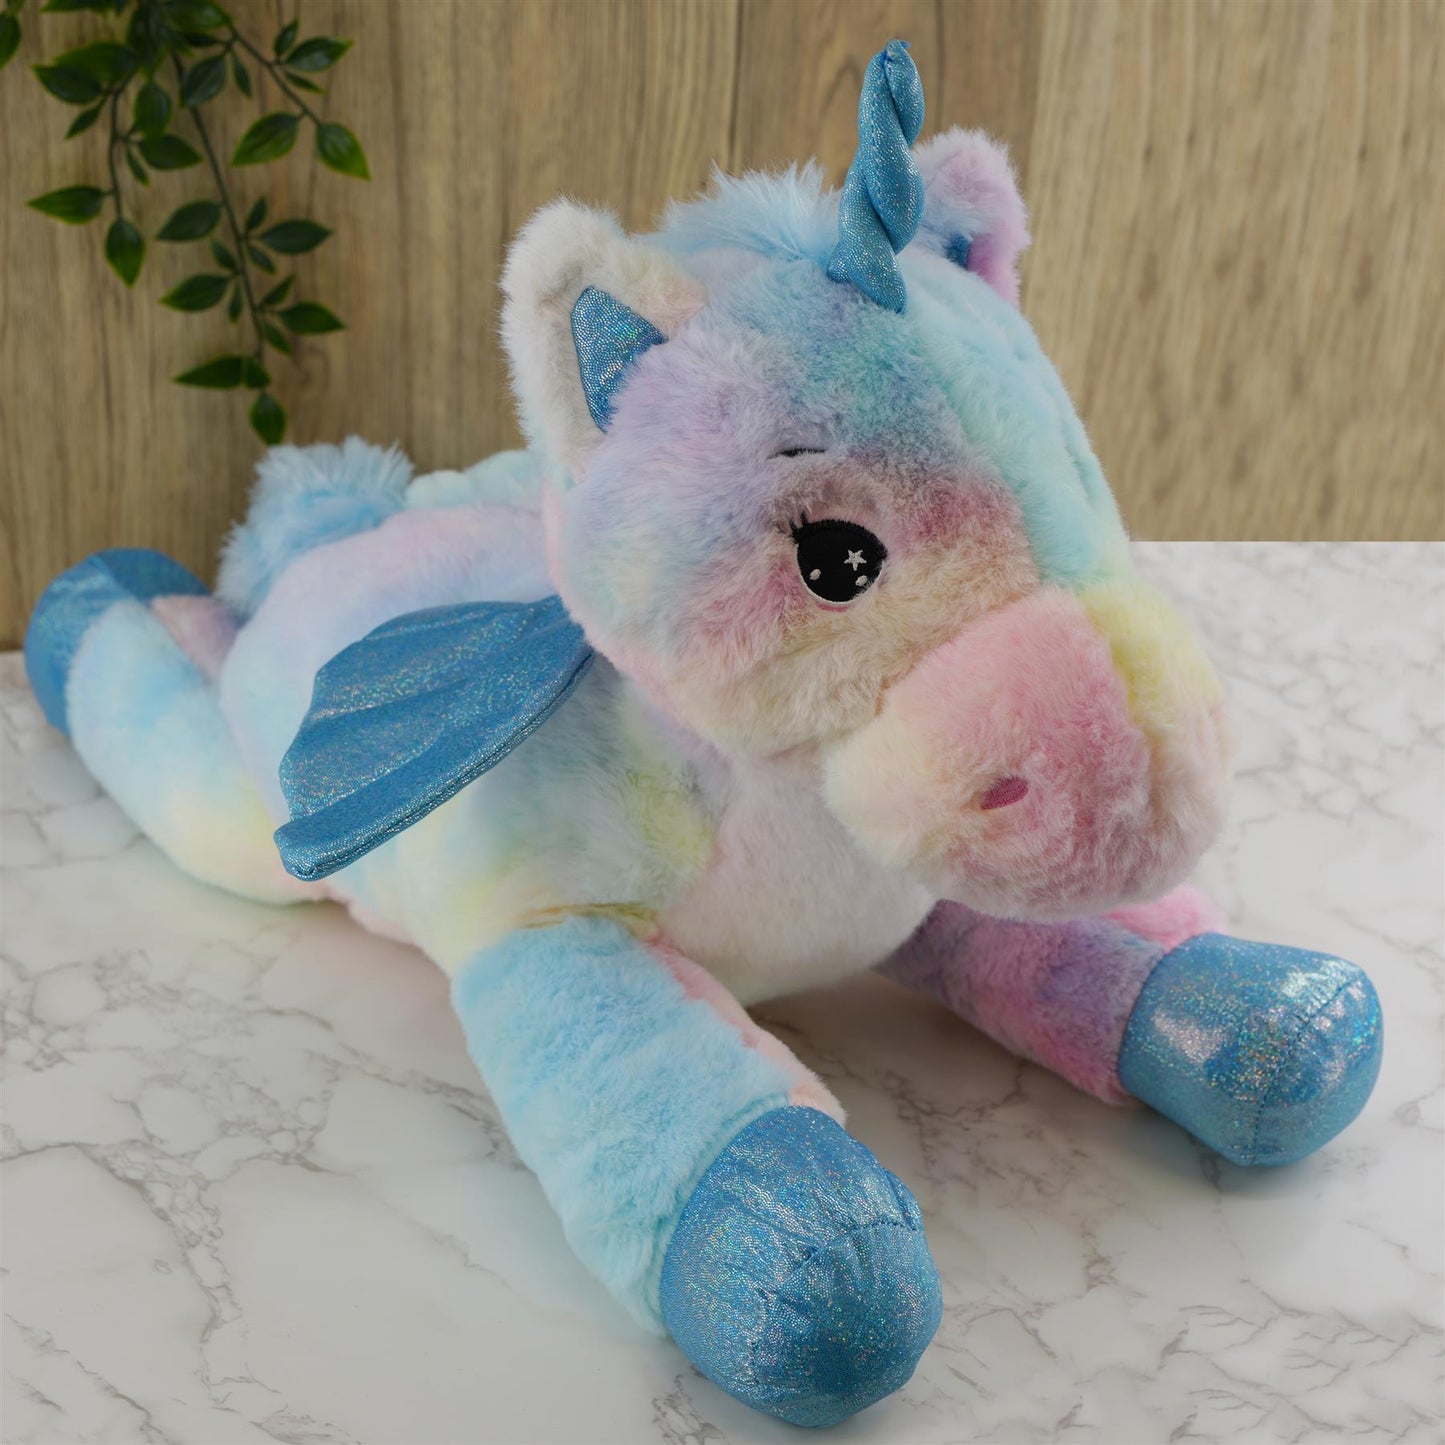 Unicorn with Sparkling Wings - Soft Toy by The Magic Toy Shop - UKBuyZone